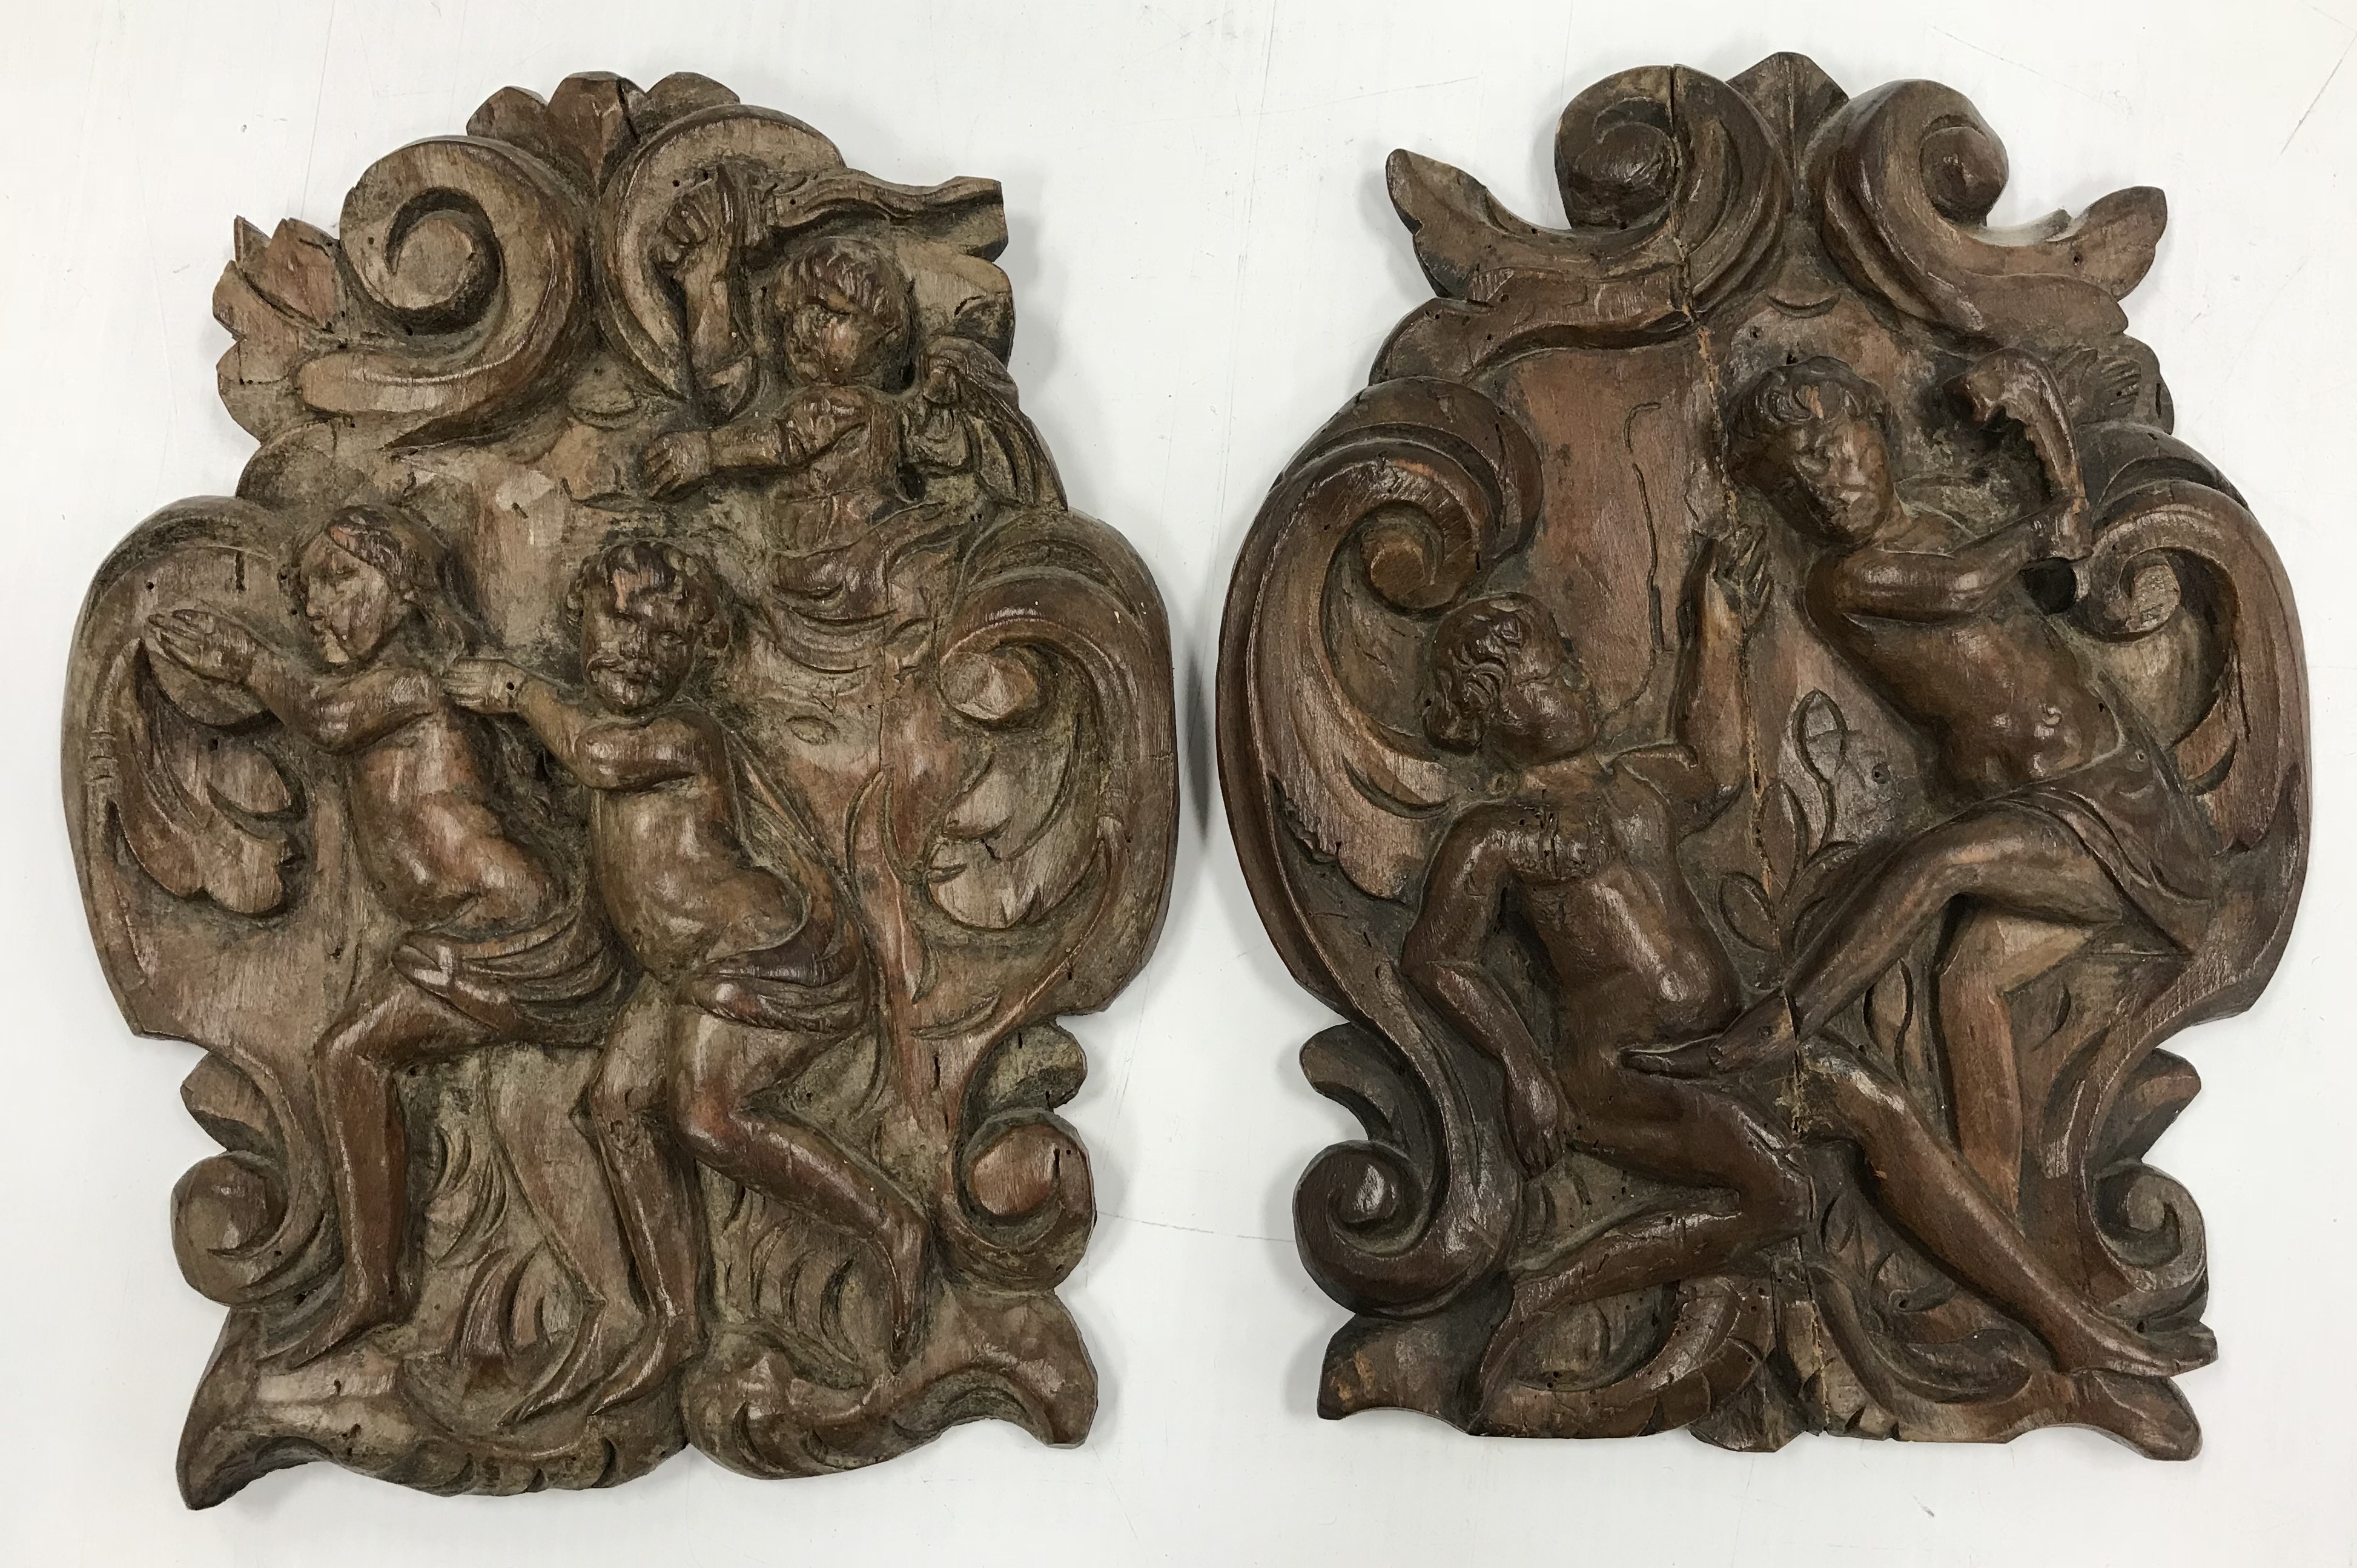 A Continental carved walnut panel depicting "The expulsion of Adam and Eve from the Garden of Eden